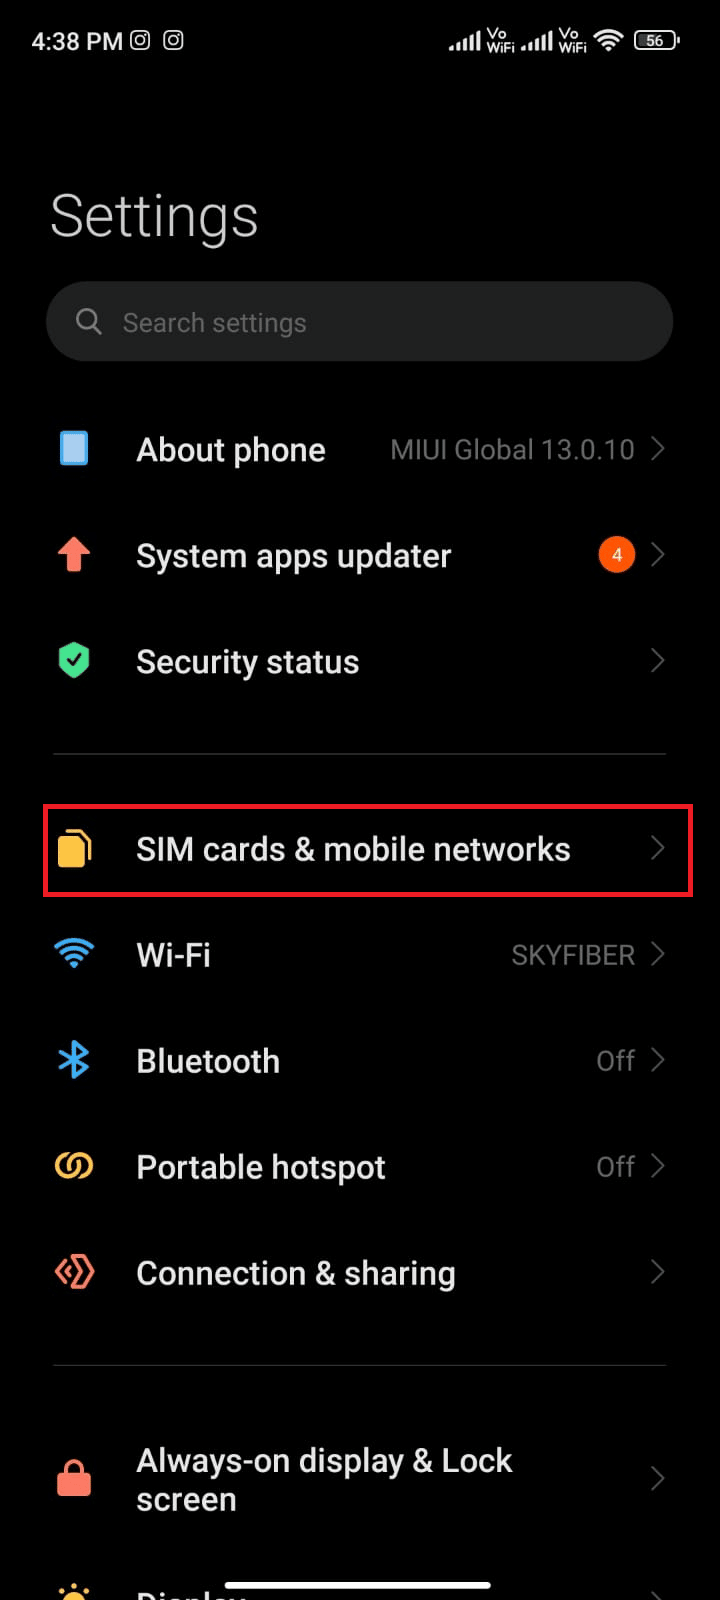 tap the SIM cards and mobile networks option